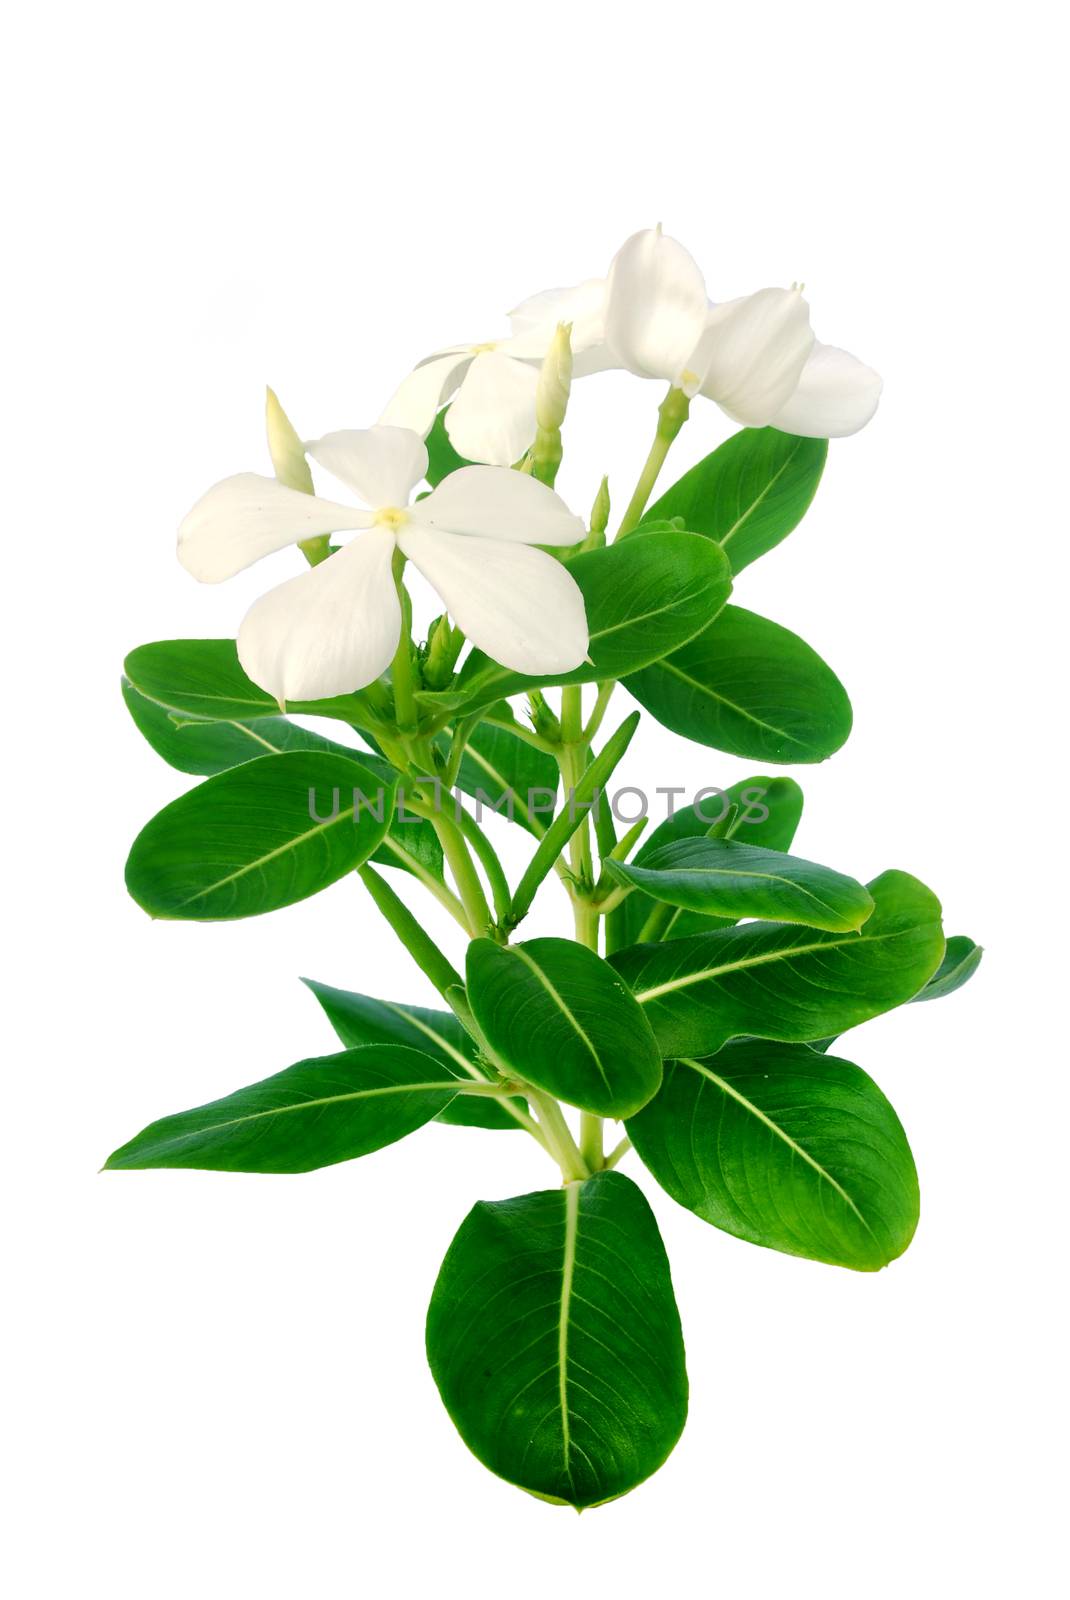 West Indian periwinkle mosquito repellent or spray on white background.(with Clipping Path).